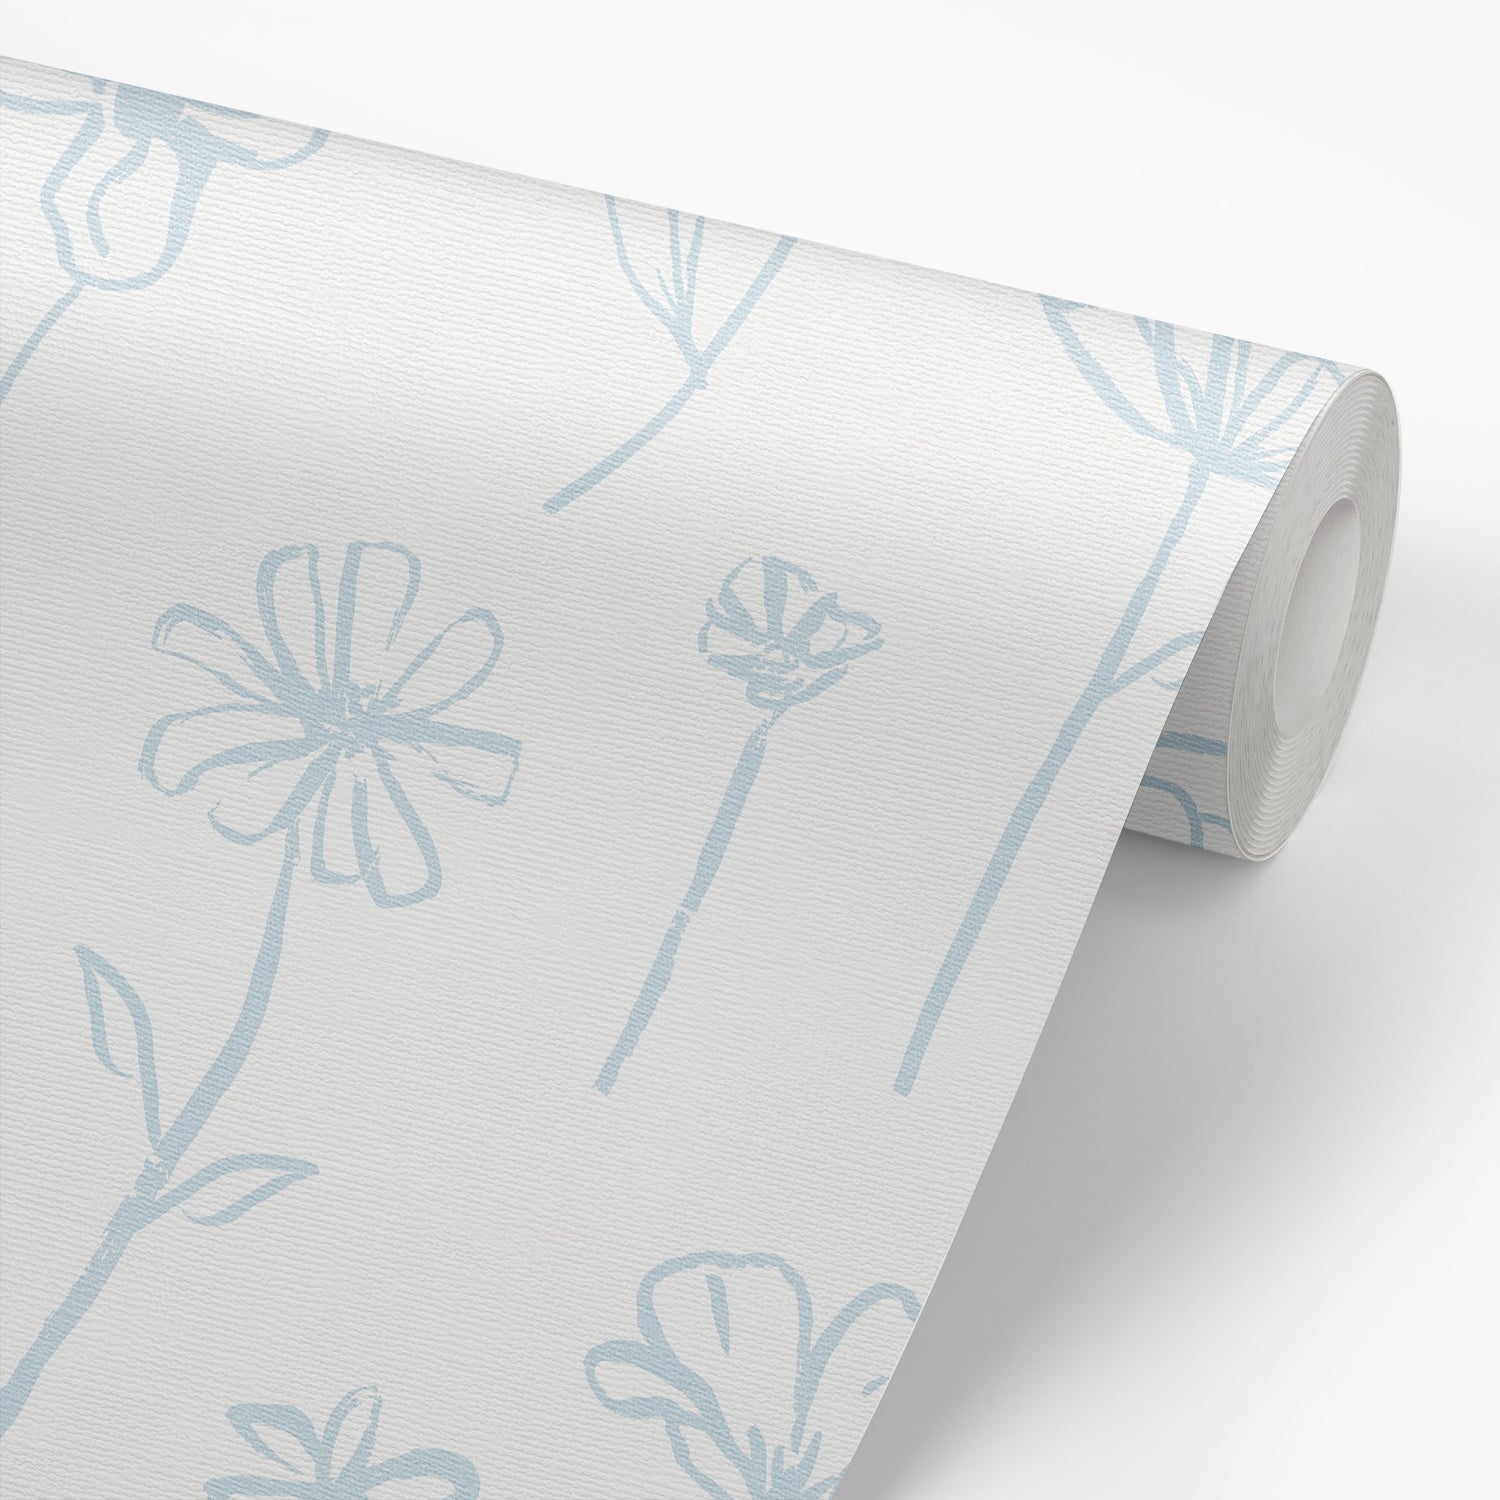 Wallpaper panel close up Nursery and Playroom featuring Lila's Floral Stems- a feminine dainty floral pattern